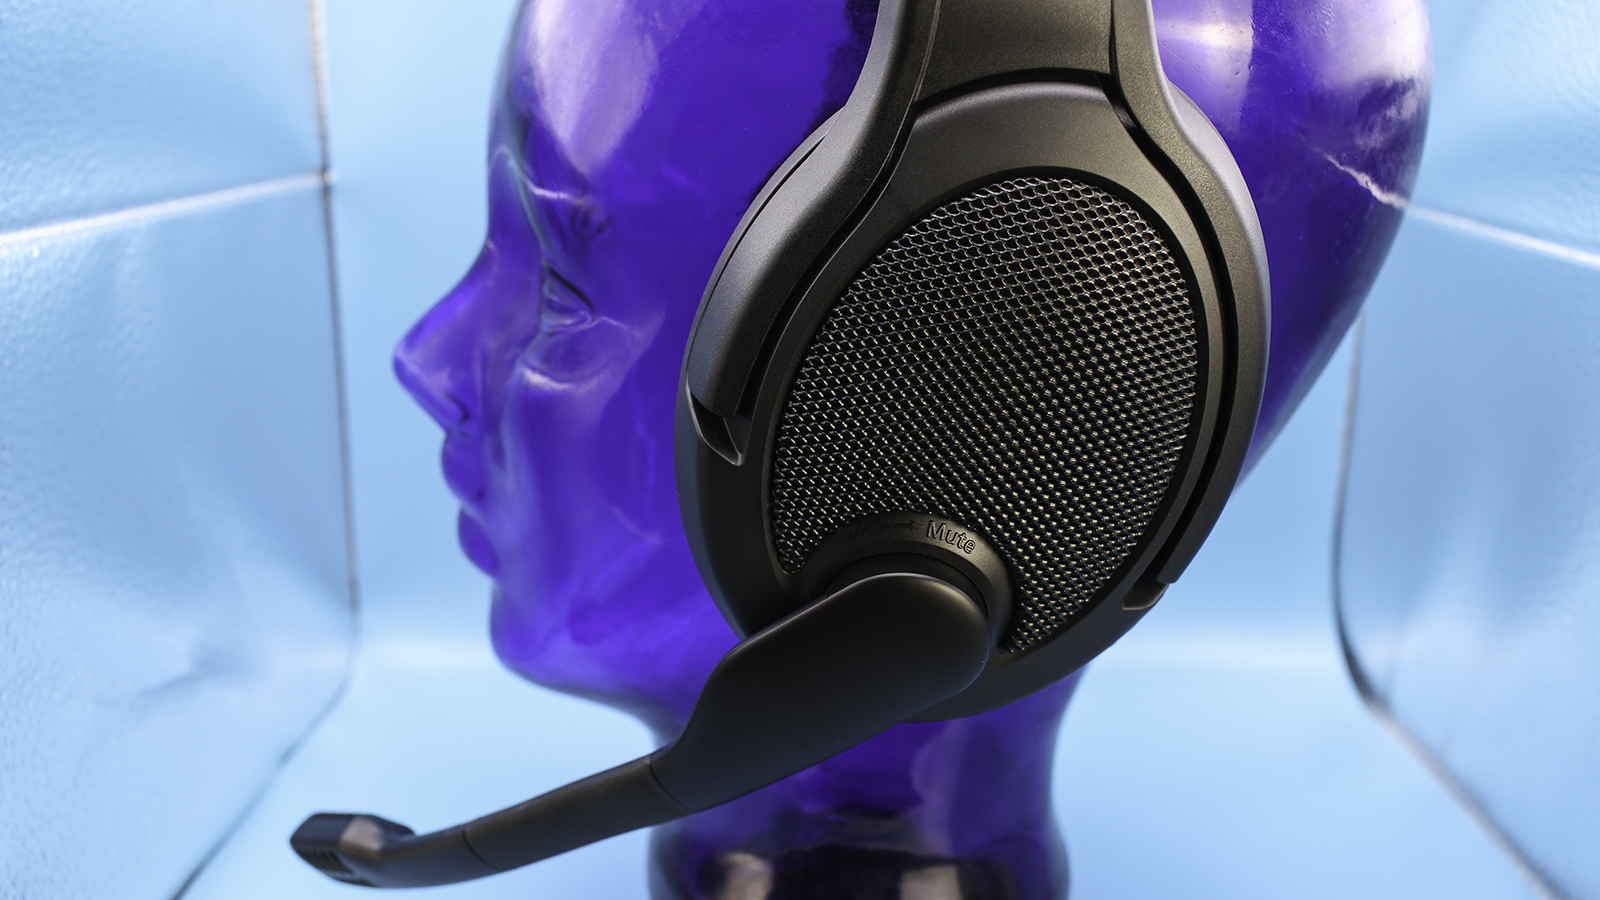 This headset's directional game sound is so good you'll feel like